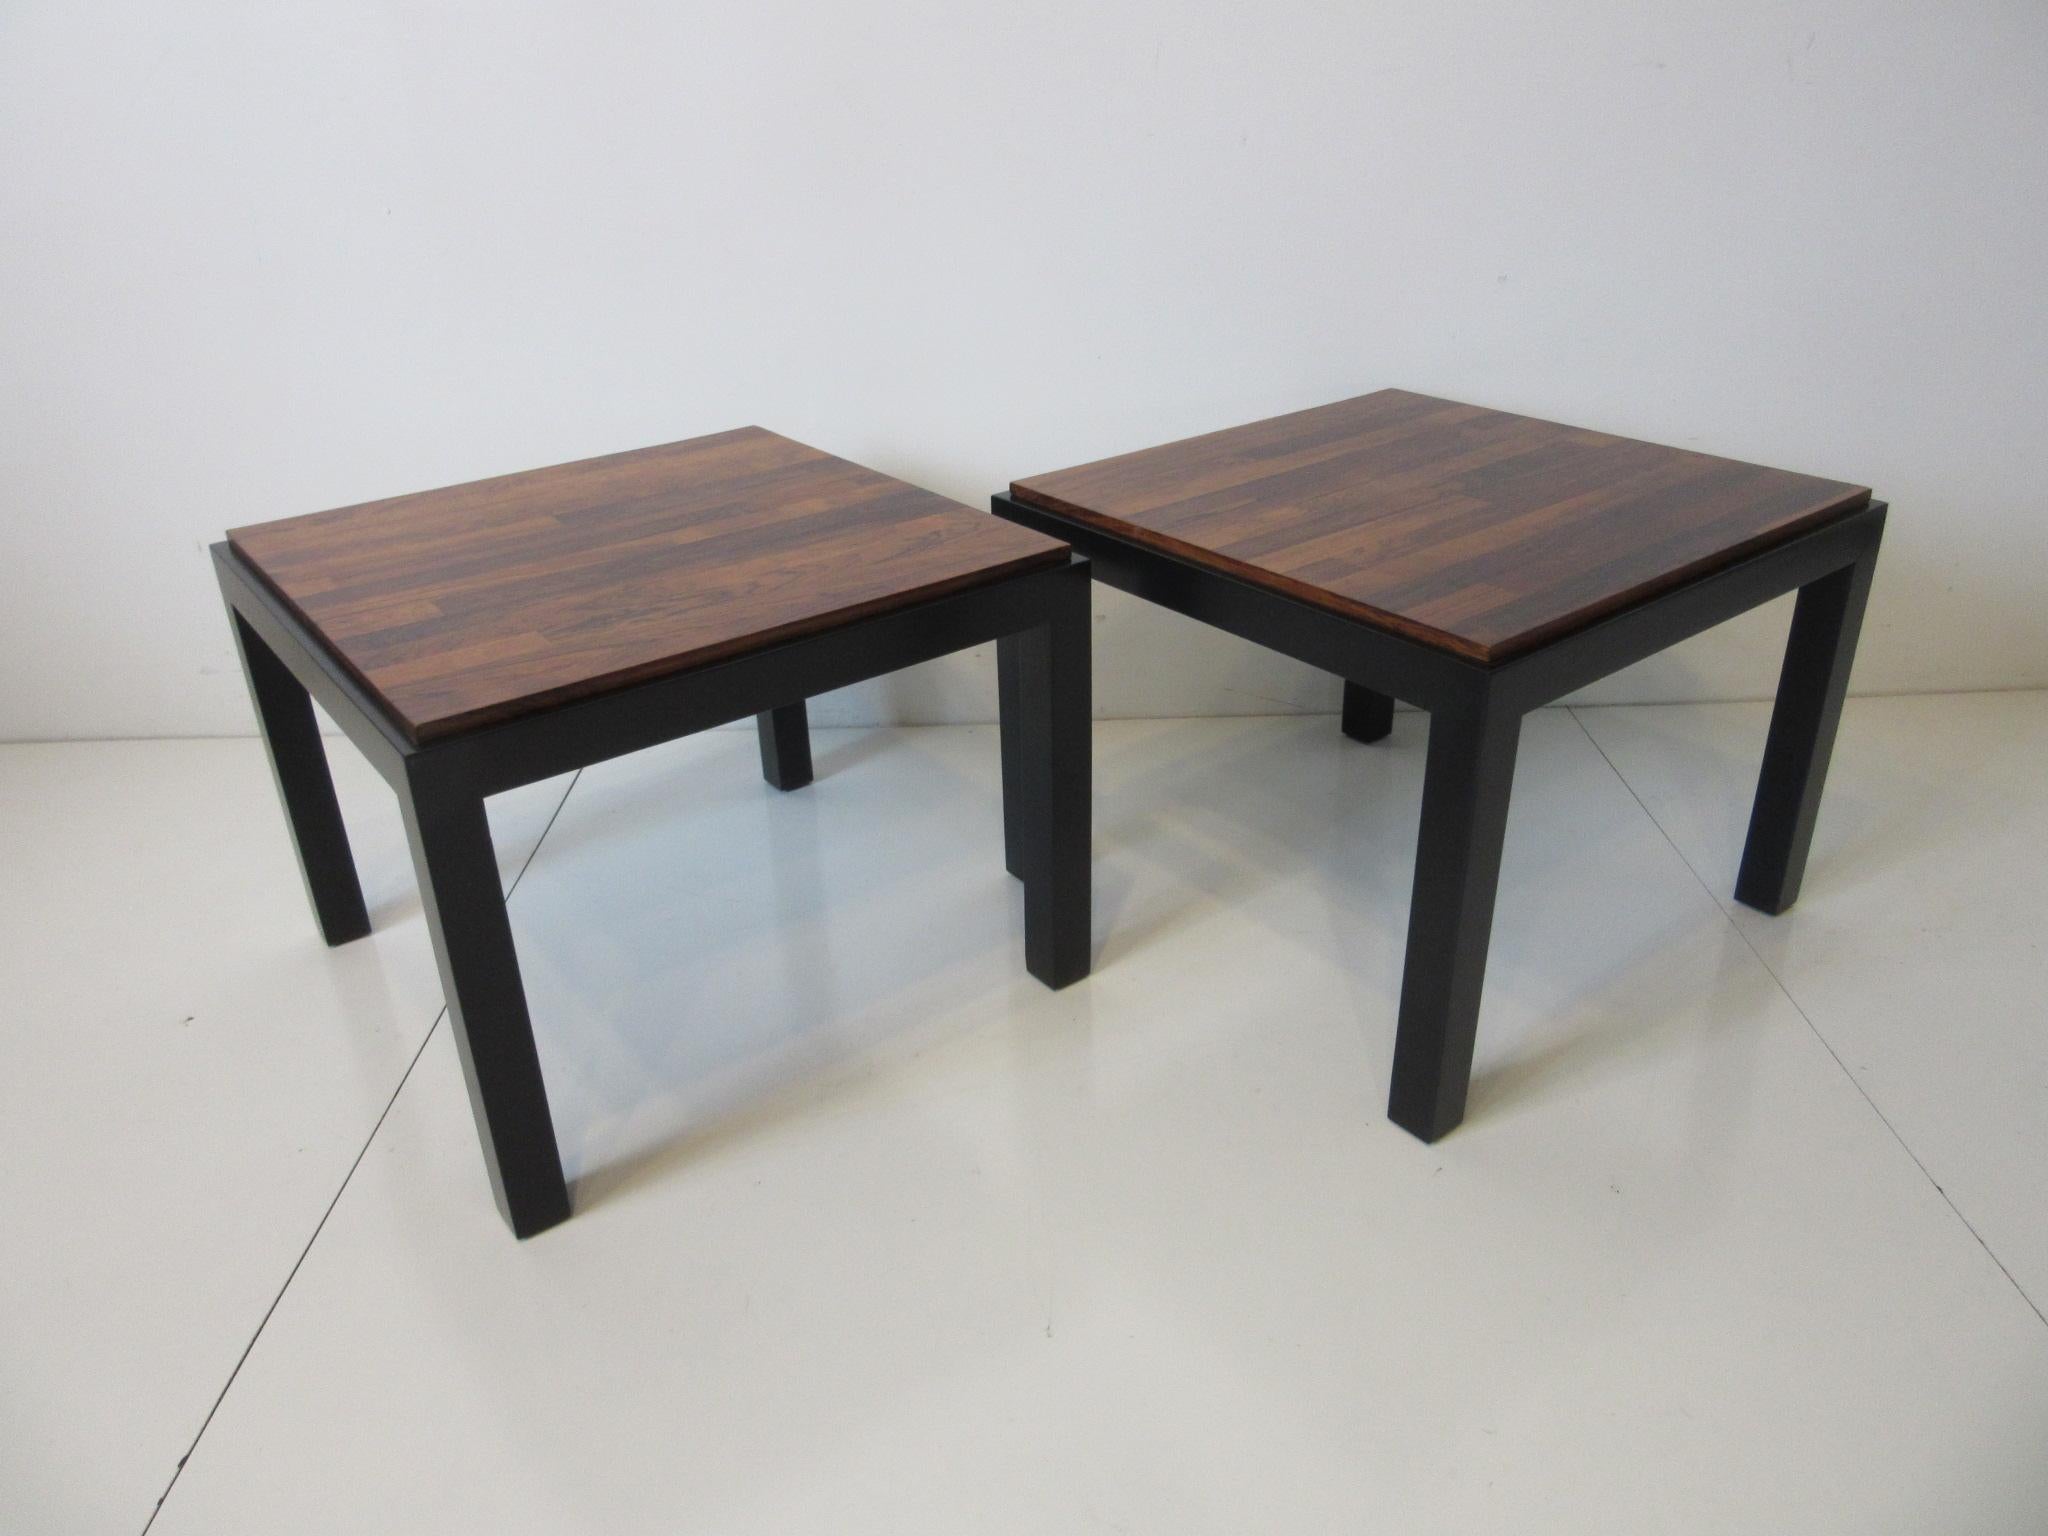 A pair of parson styled side tables with the bases in a dark ebony finish having drop in rosewood tops in the manner of Milo Baughman and the Thayer Coggin furniture company.